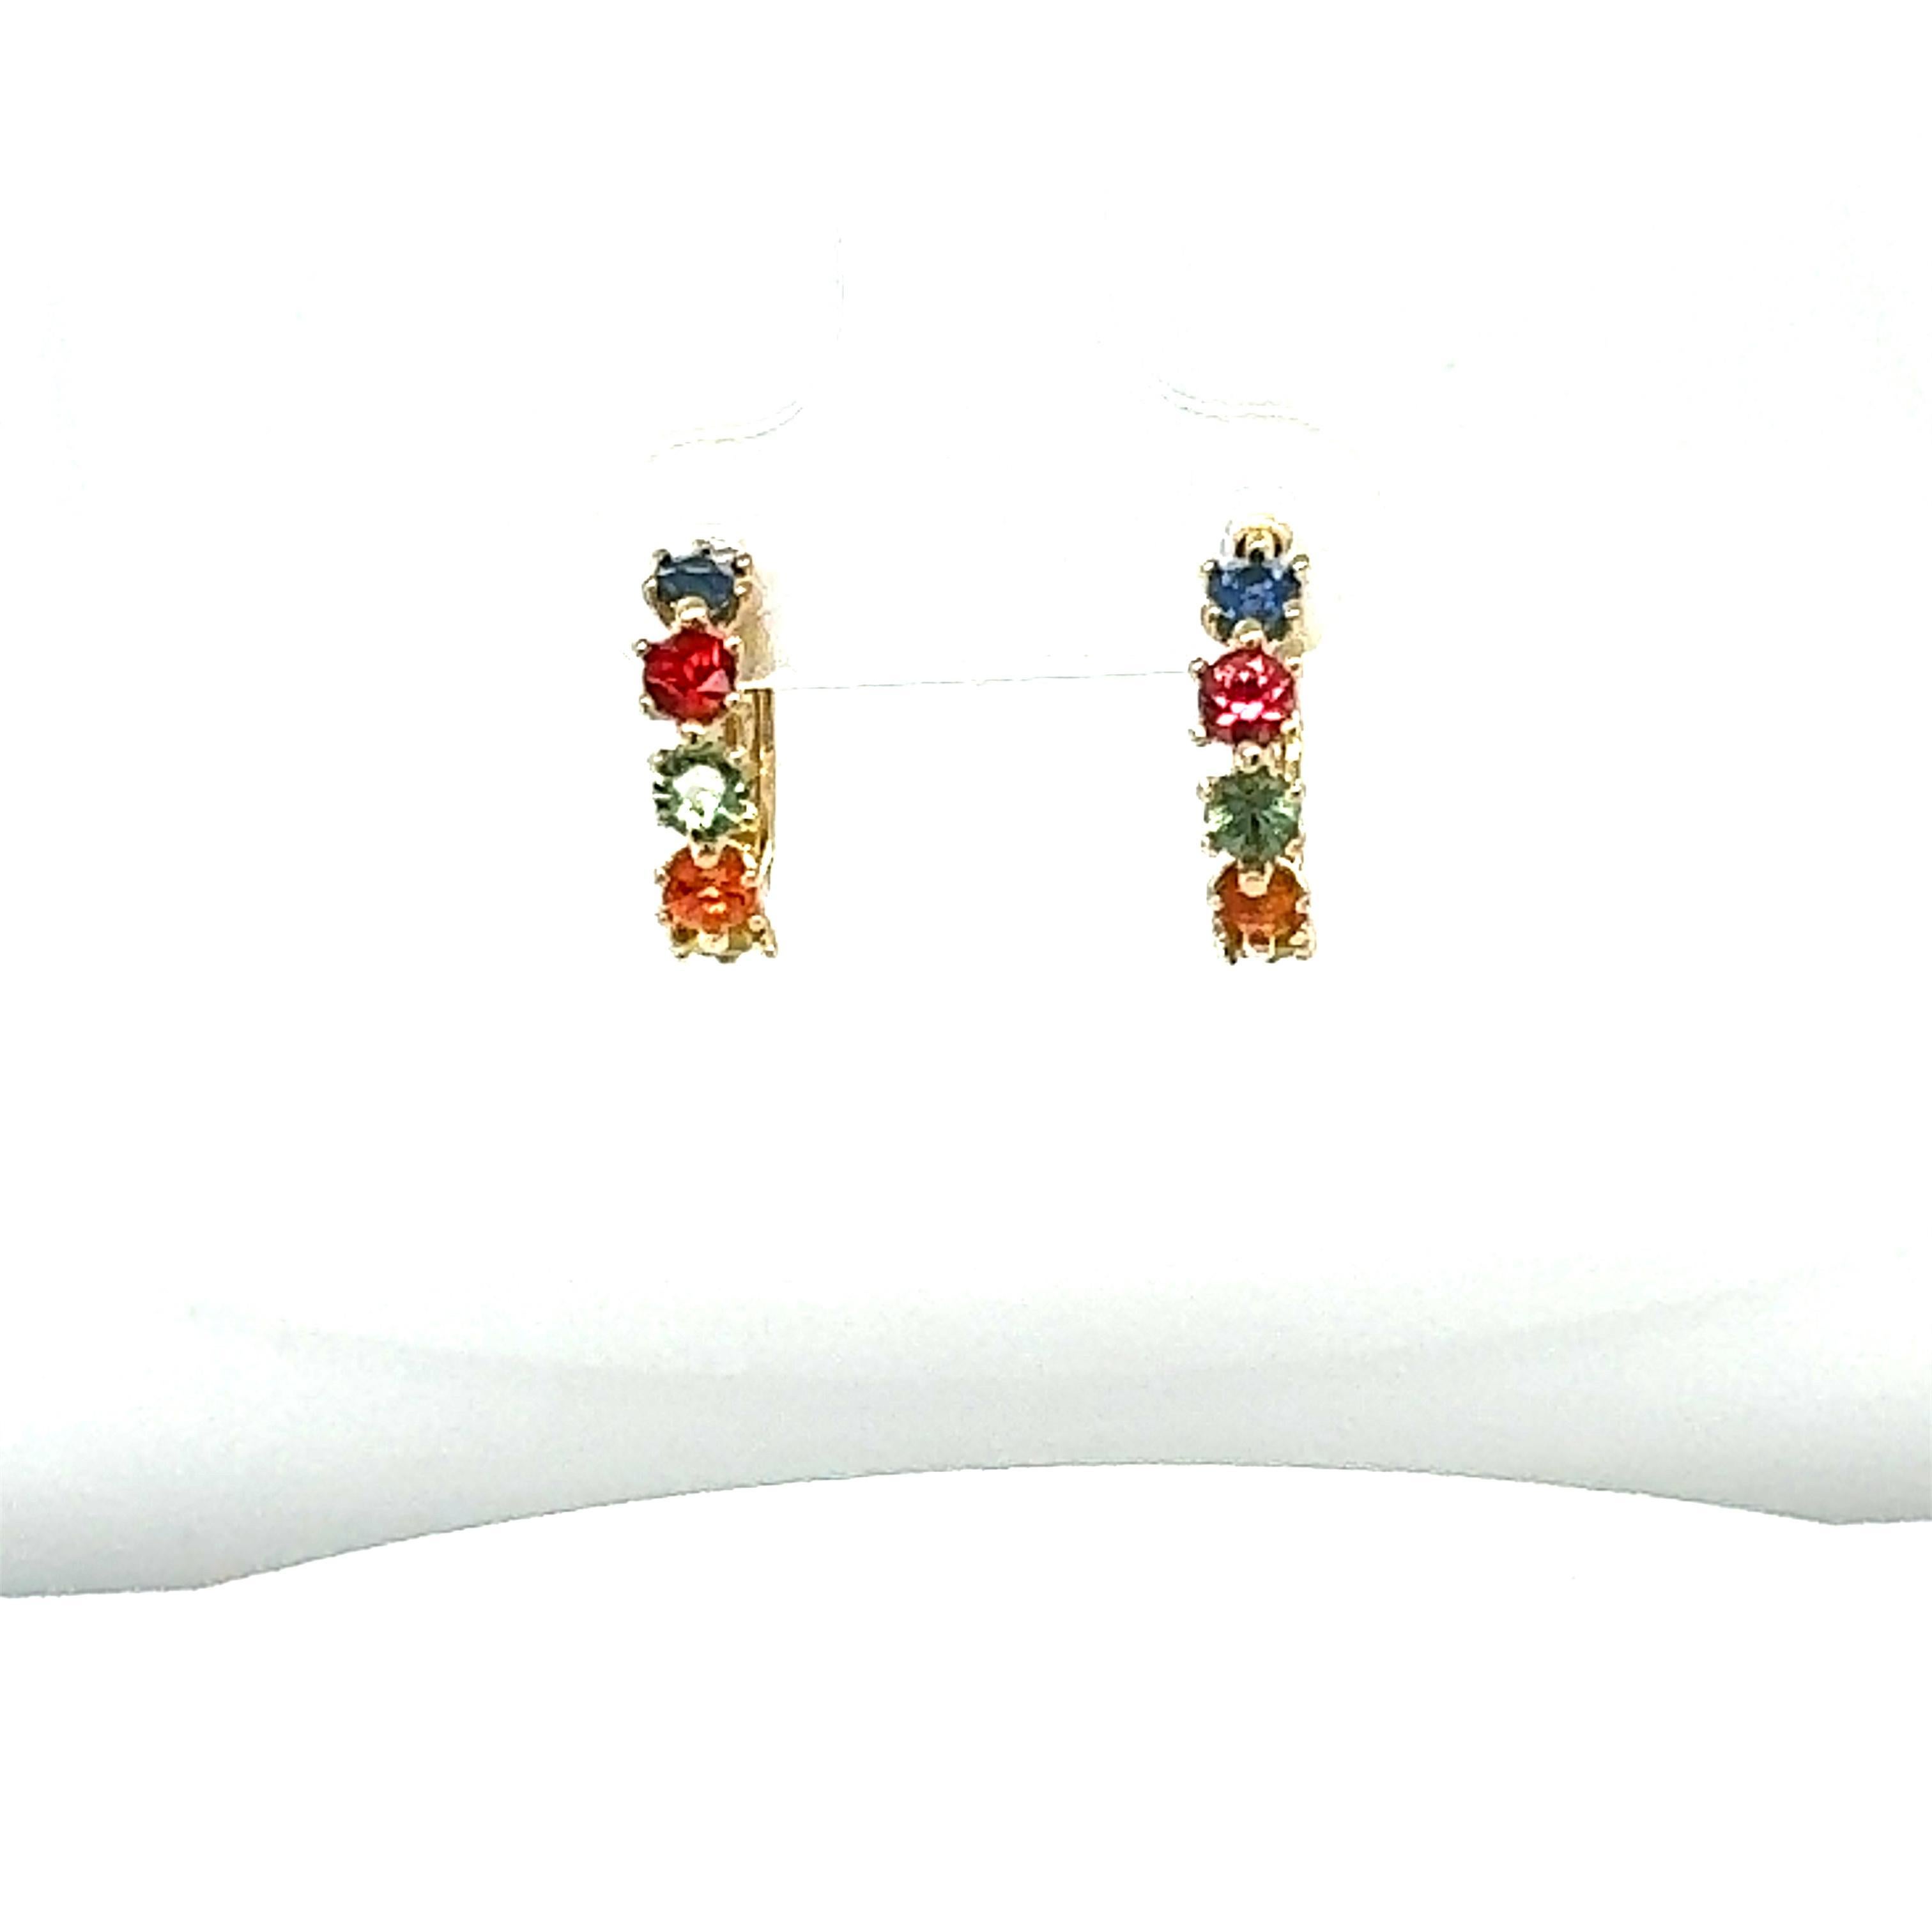 1.13 Carat Multicolor Sapphire Yellow Gold Huggy Earrings

There are 10 Round Cut Multicolor Natural Sapphires that weigh 1.13 carats.
Crafted in 14K Yellow Gold Earrings that weigh 2.0 grams